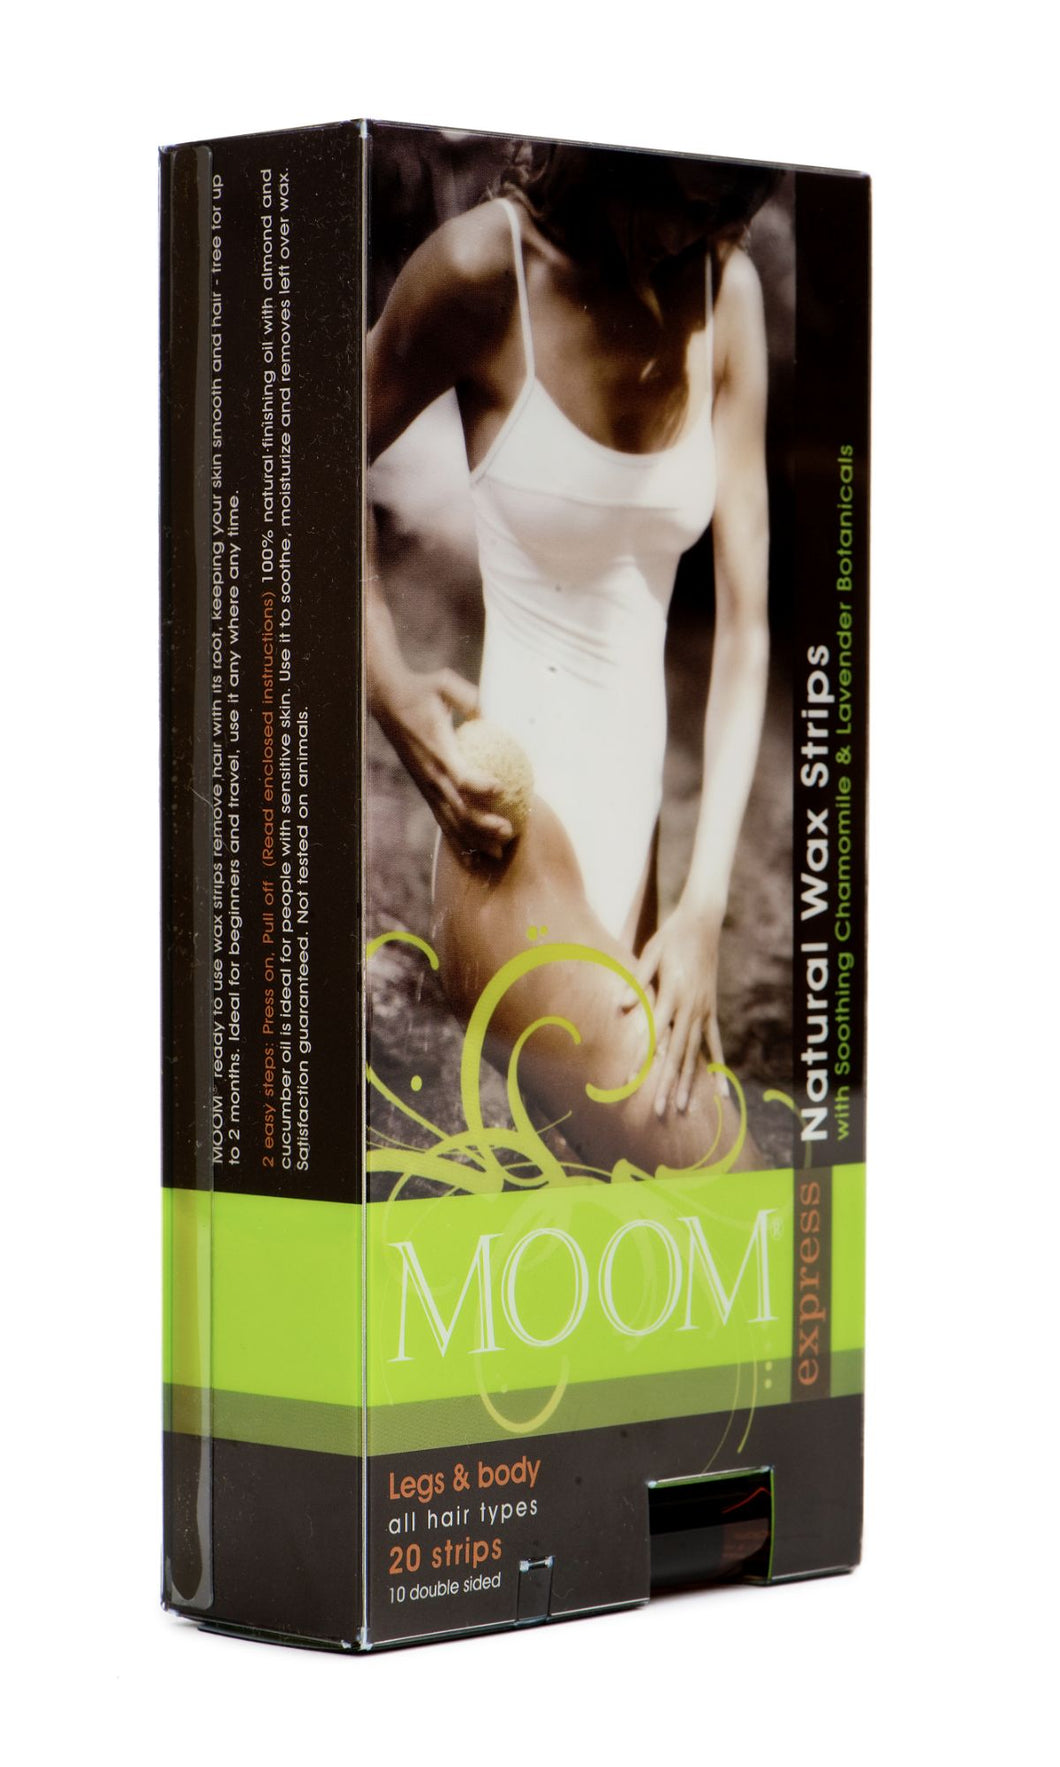 MOOM Express Pre-Waxed Strips for Legs & Body (2 Pack)